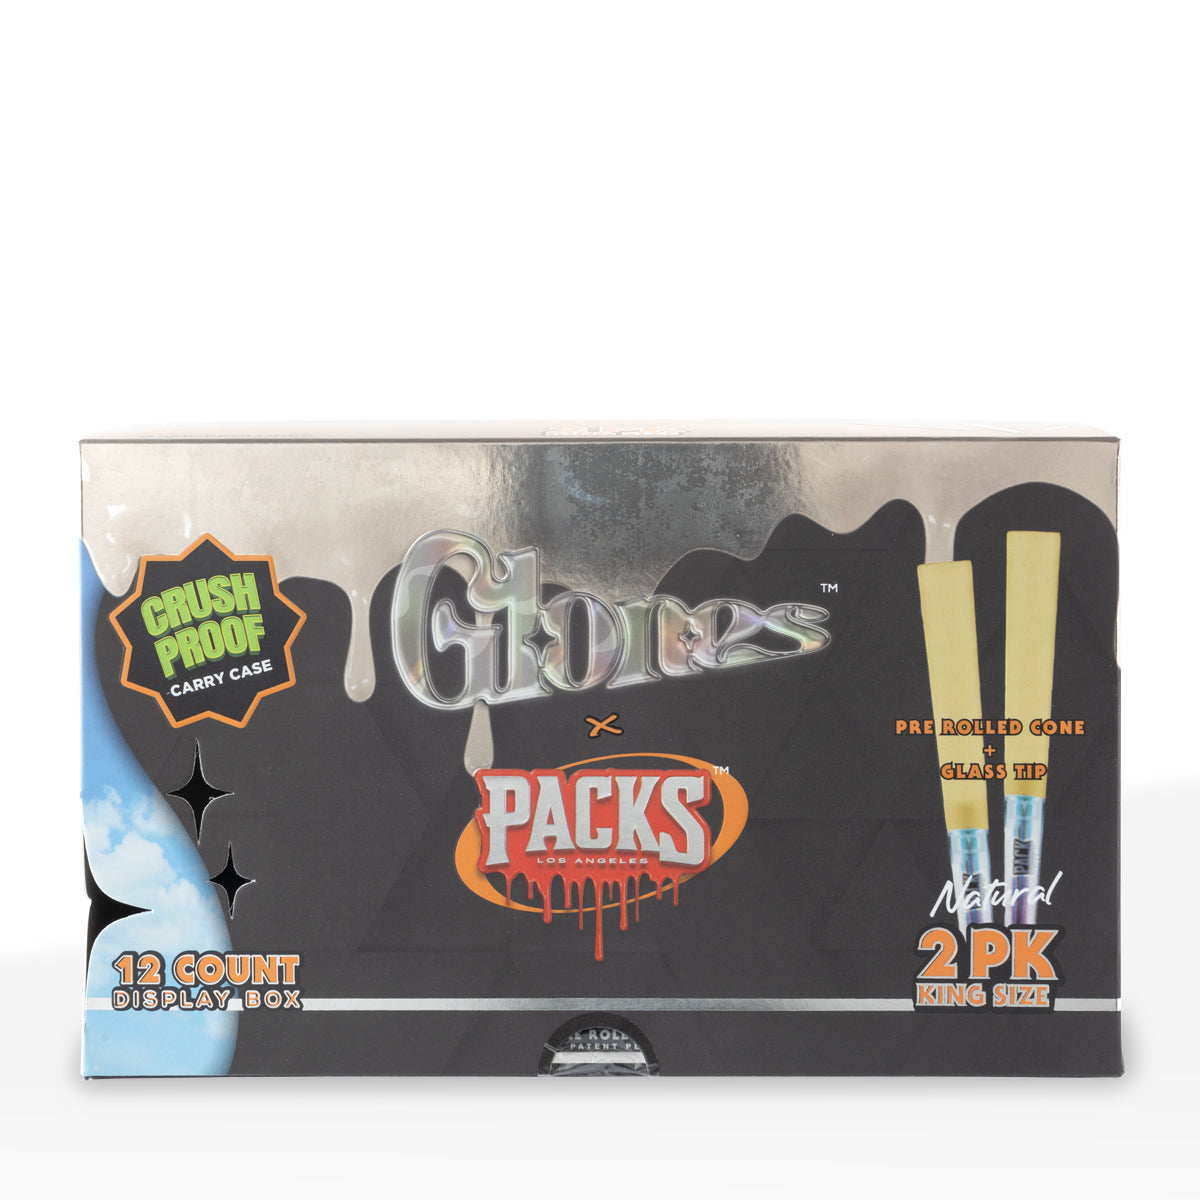 Glones x Packs | Pre-Rolled Cones King Size| 109mm -- 12 Count - Natural Papers